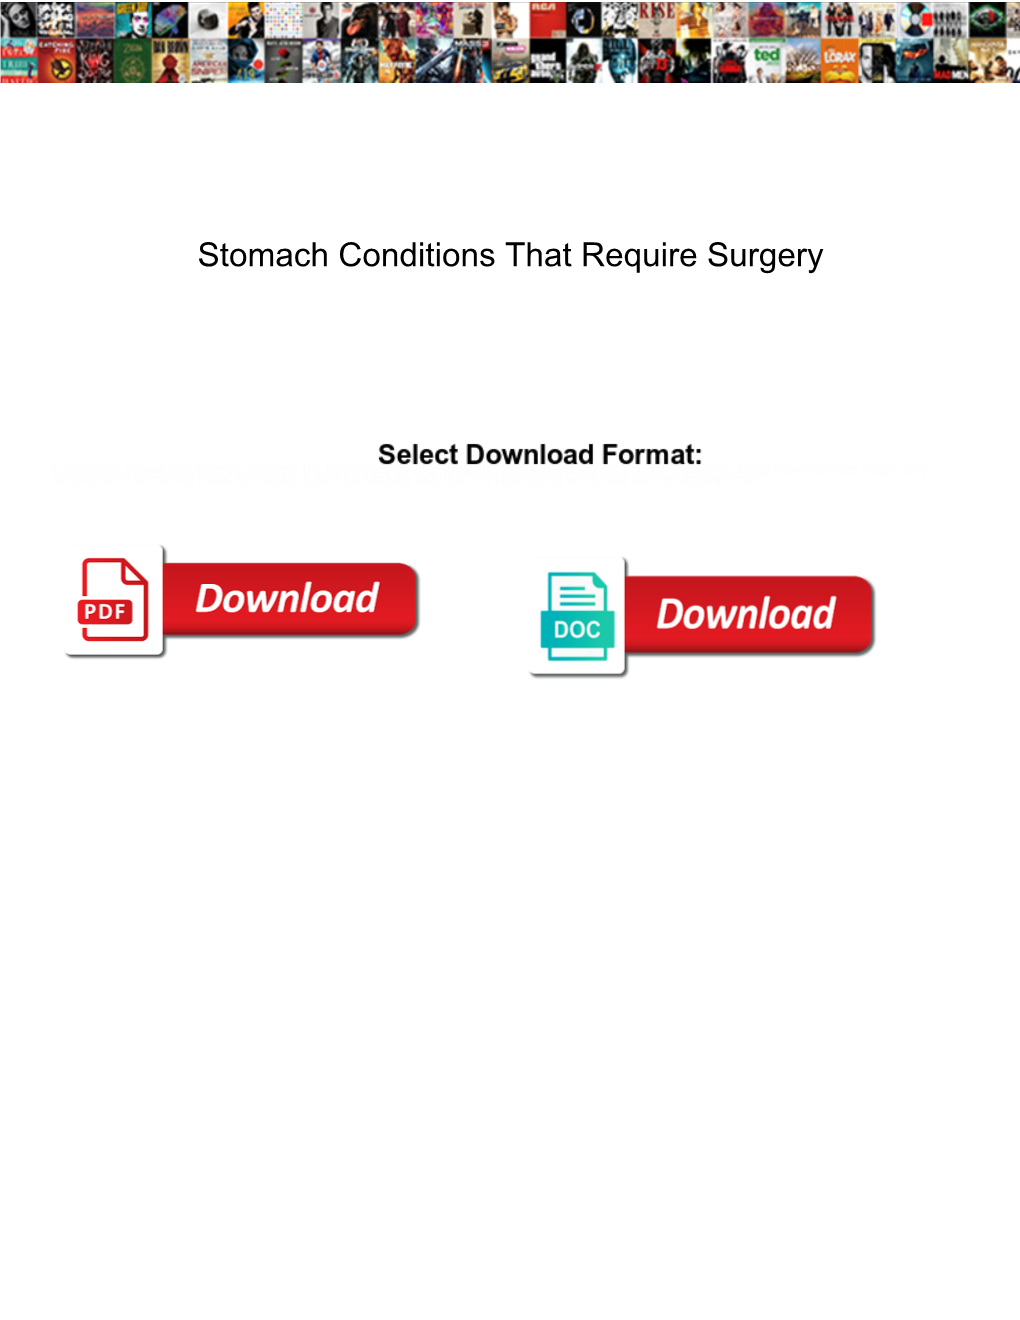 Stomach Conditions That Require Surgery